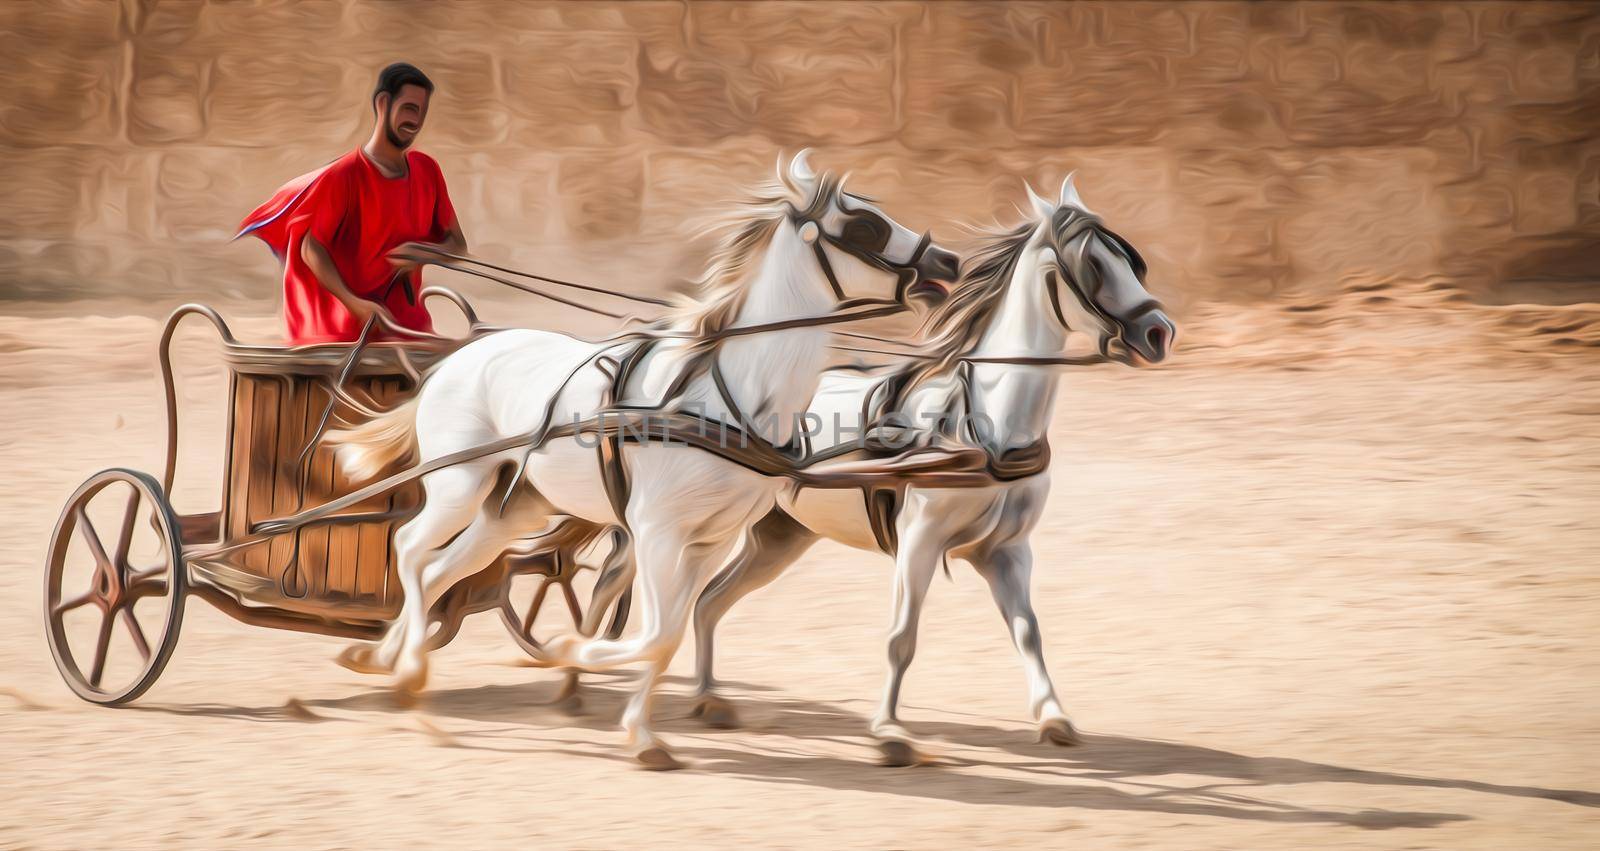 Man in chariot wearing red robe, white horses.